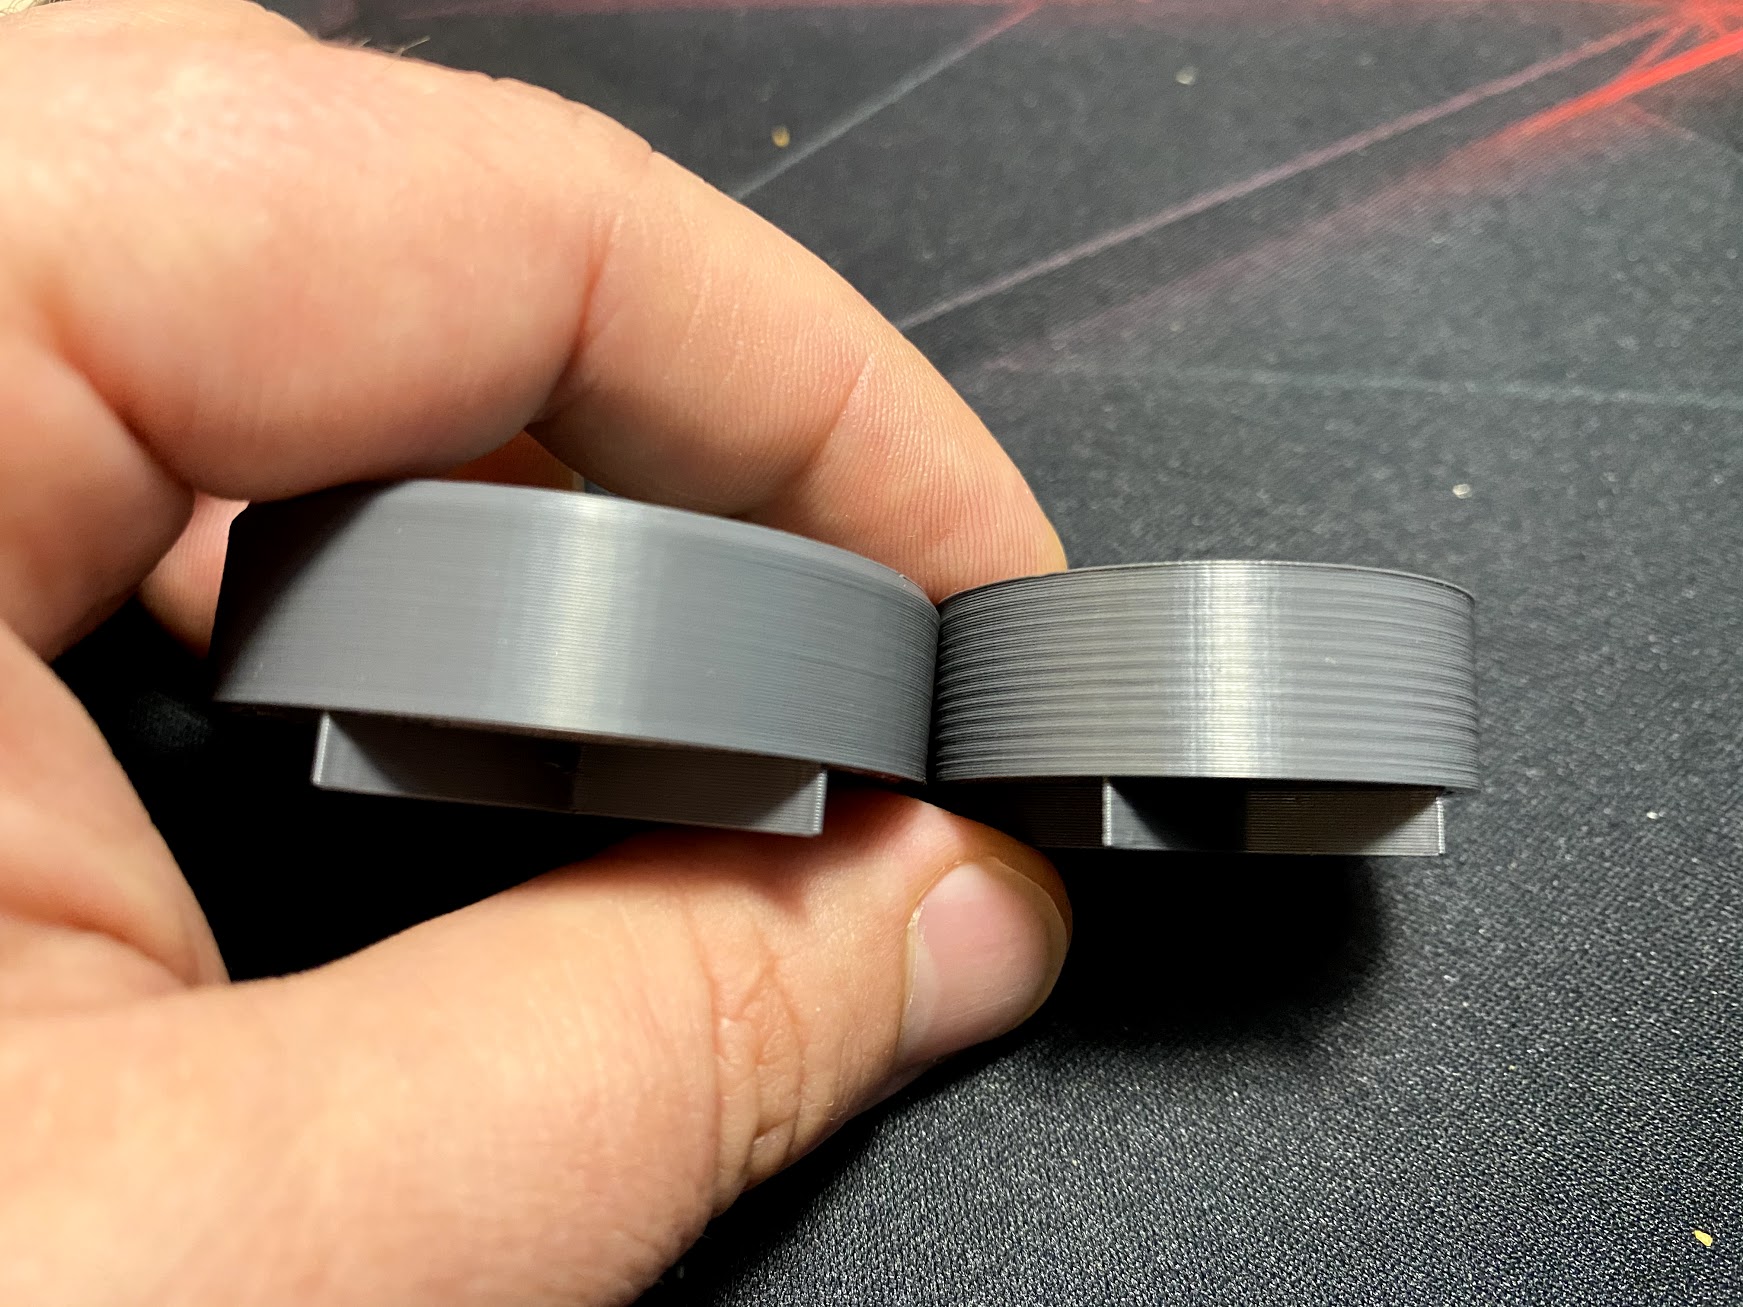 Print quality issues – General announcements and releases – Prusa3D Forum